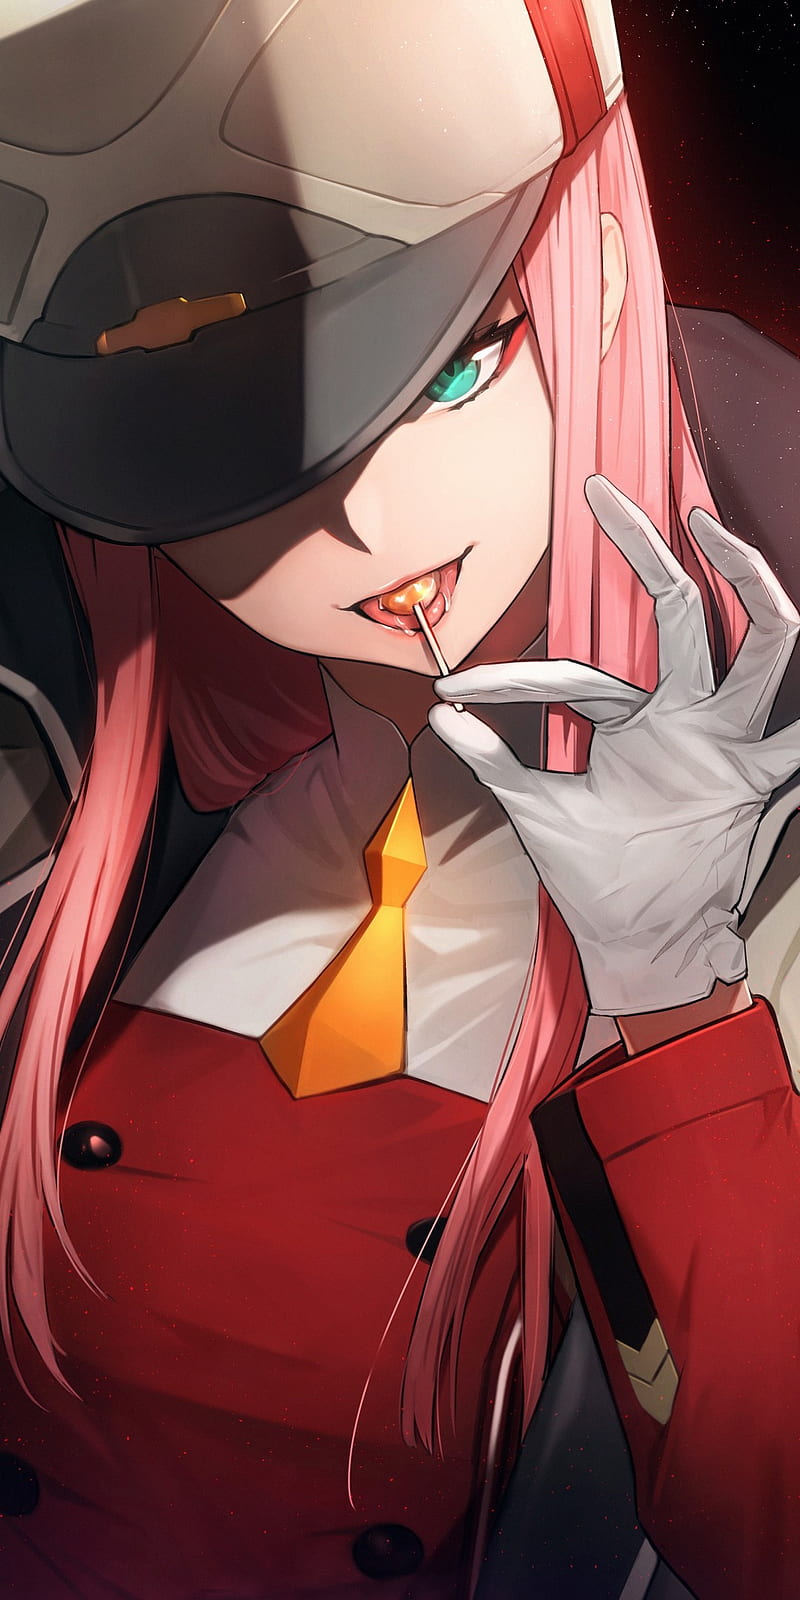 1080x2280 Anime Darling In The Franxx One Plus 6,Huawei p20,Honor